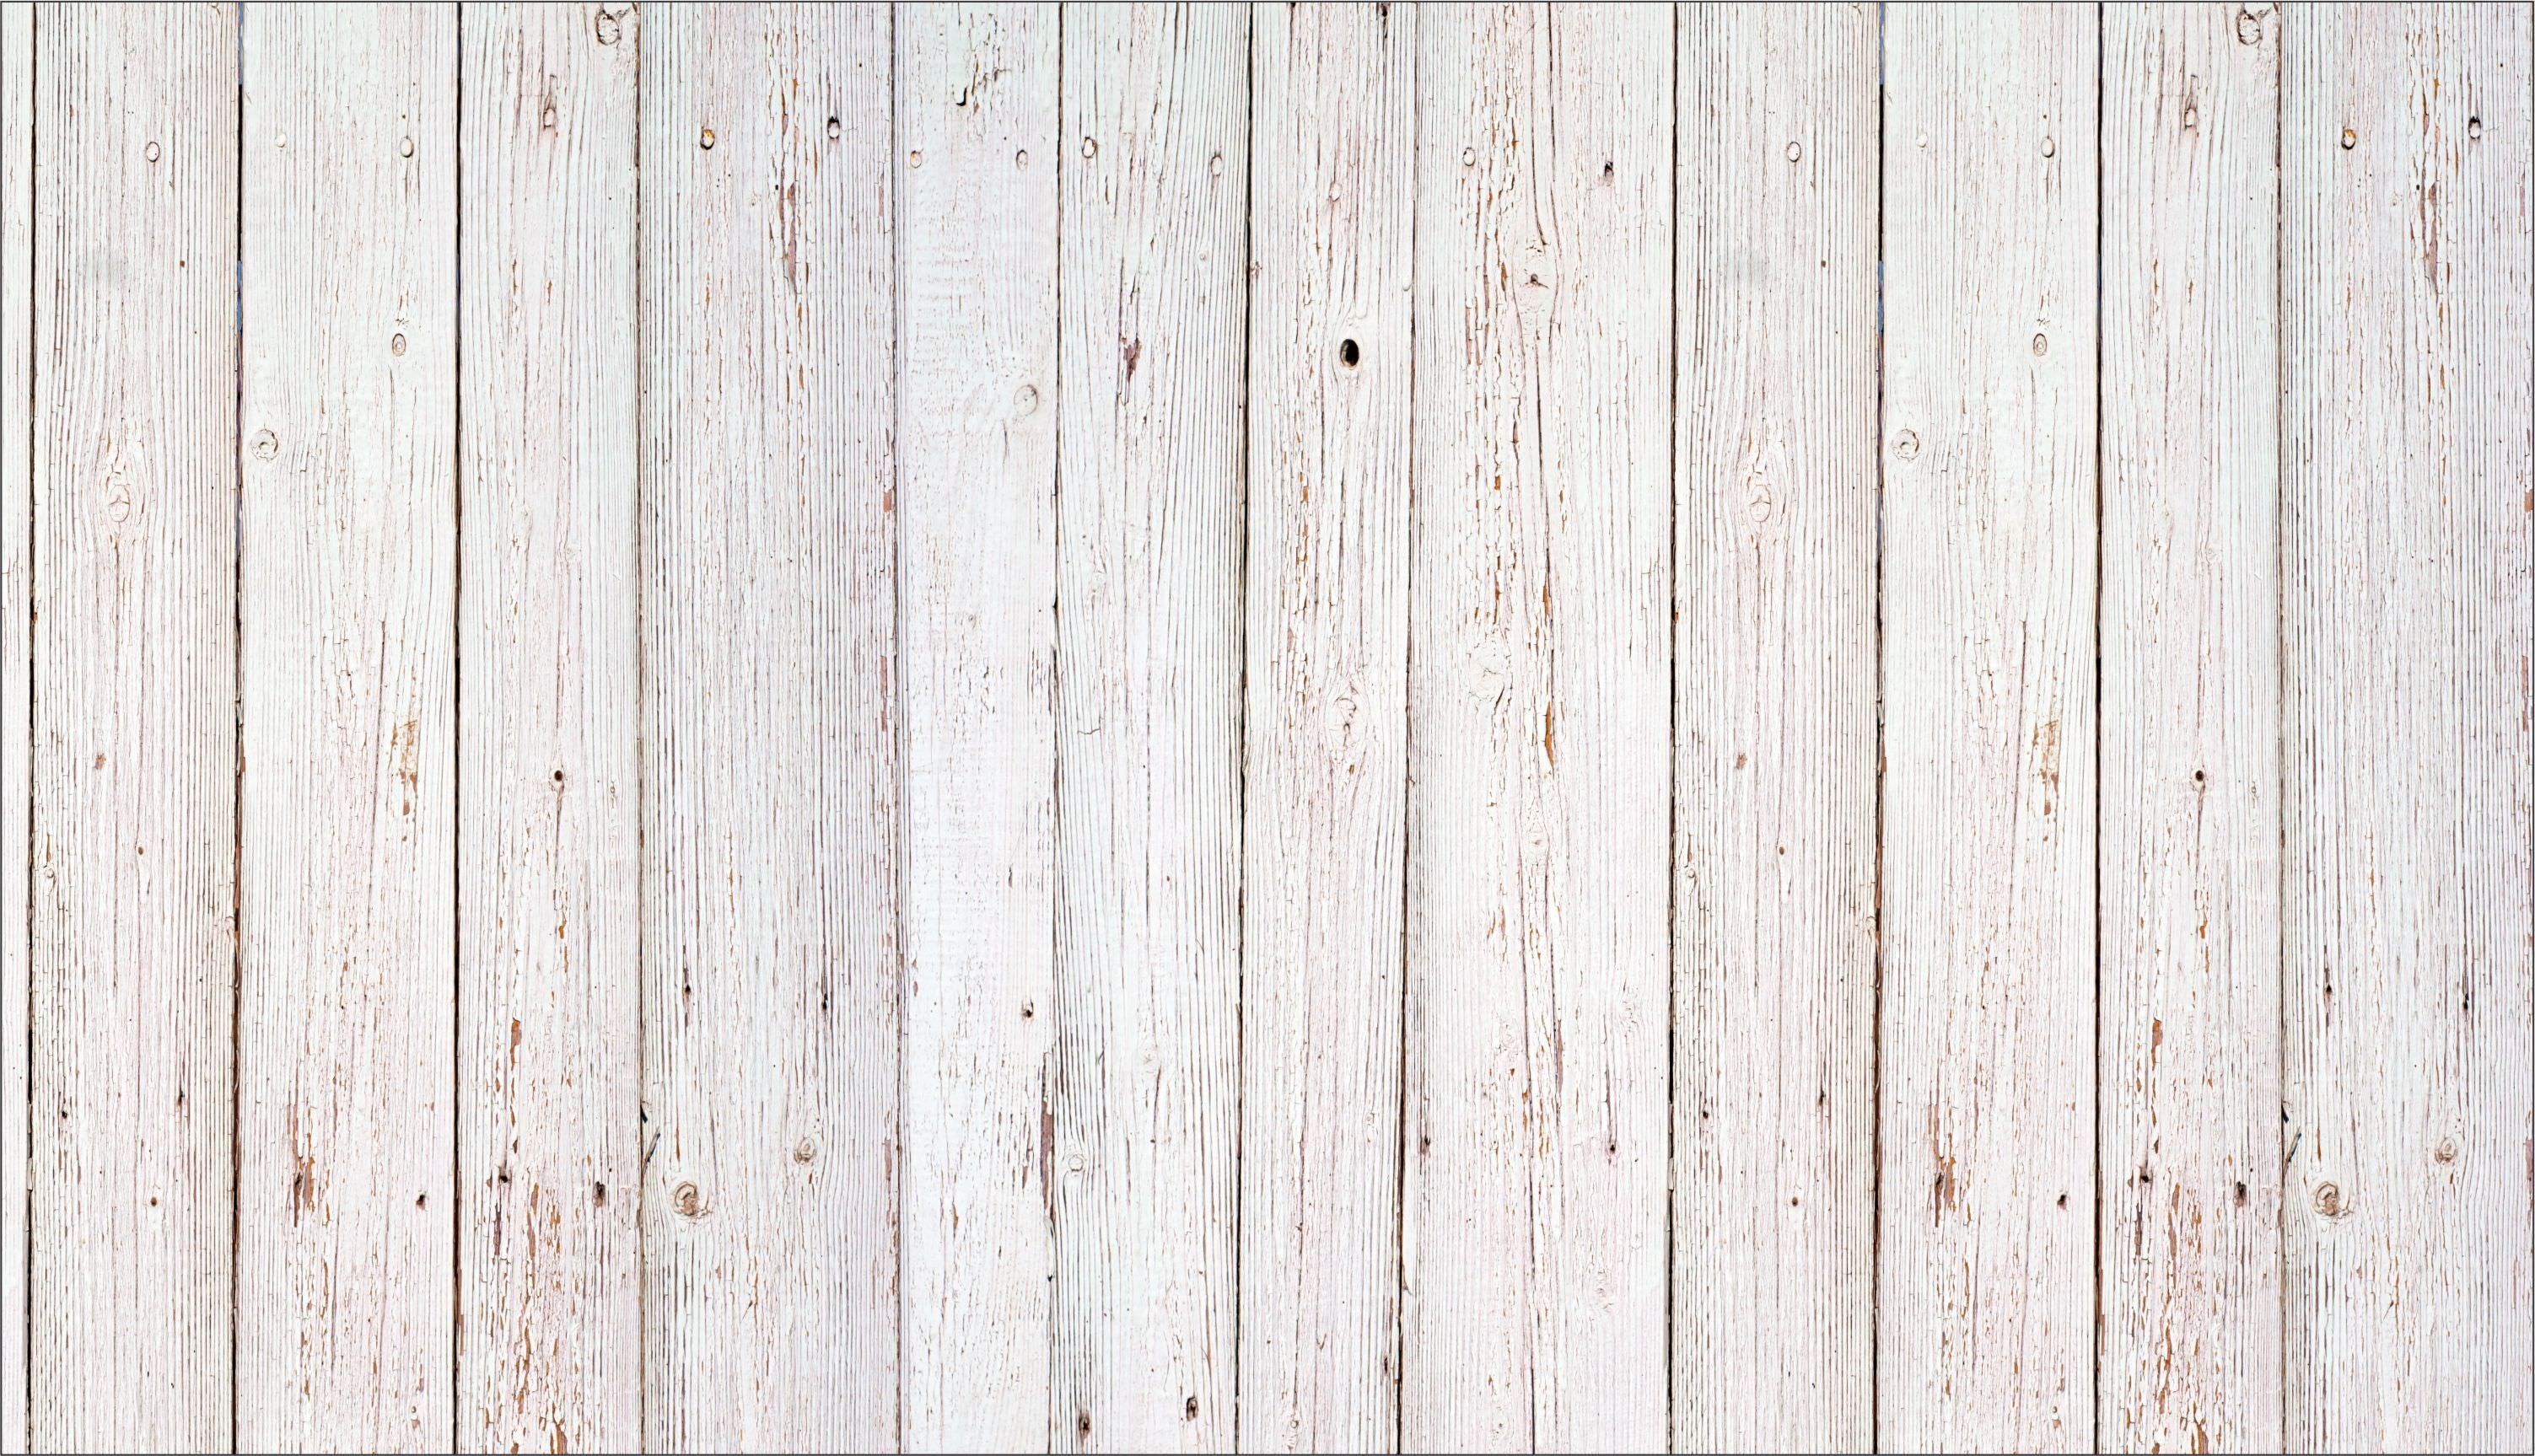 3006x1727 beautiful vintage rustic wood background for windows | Wood wallpaper, White wood floors, White wood texture